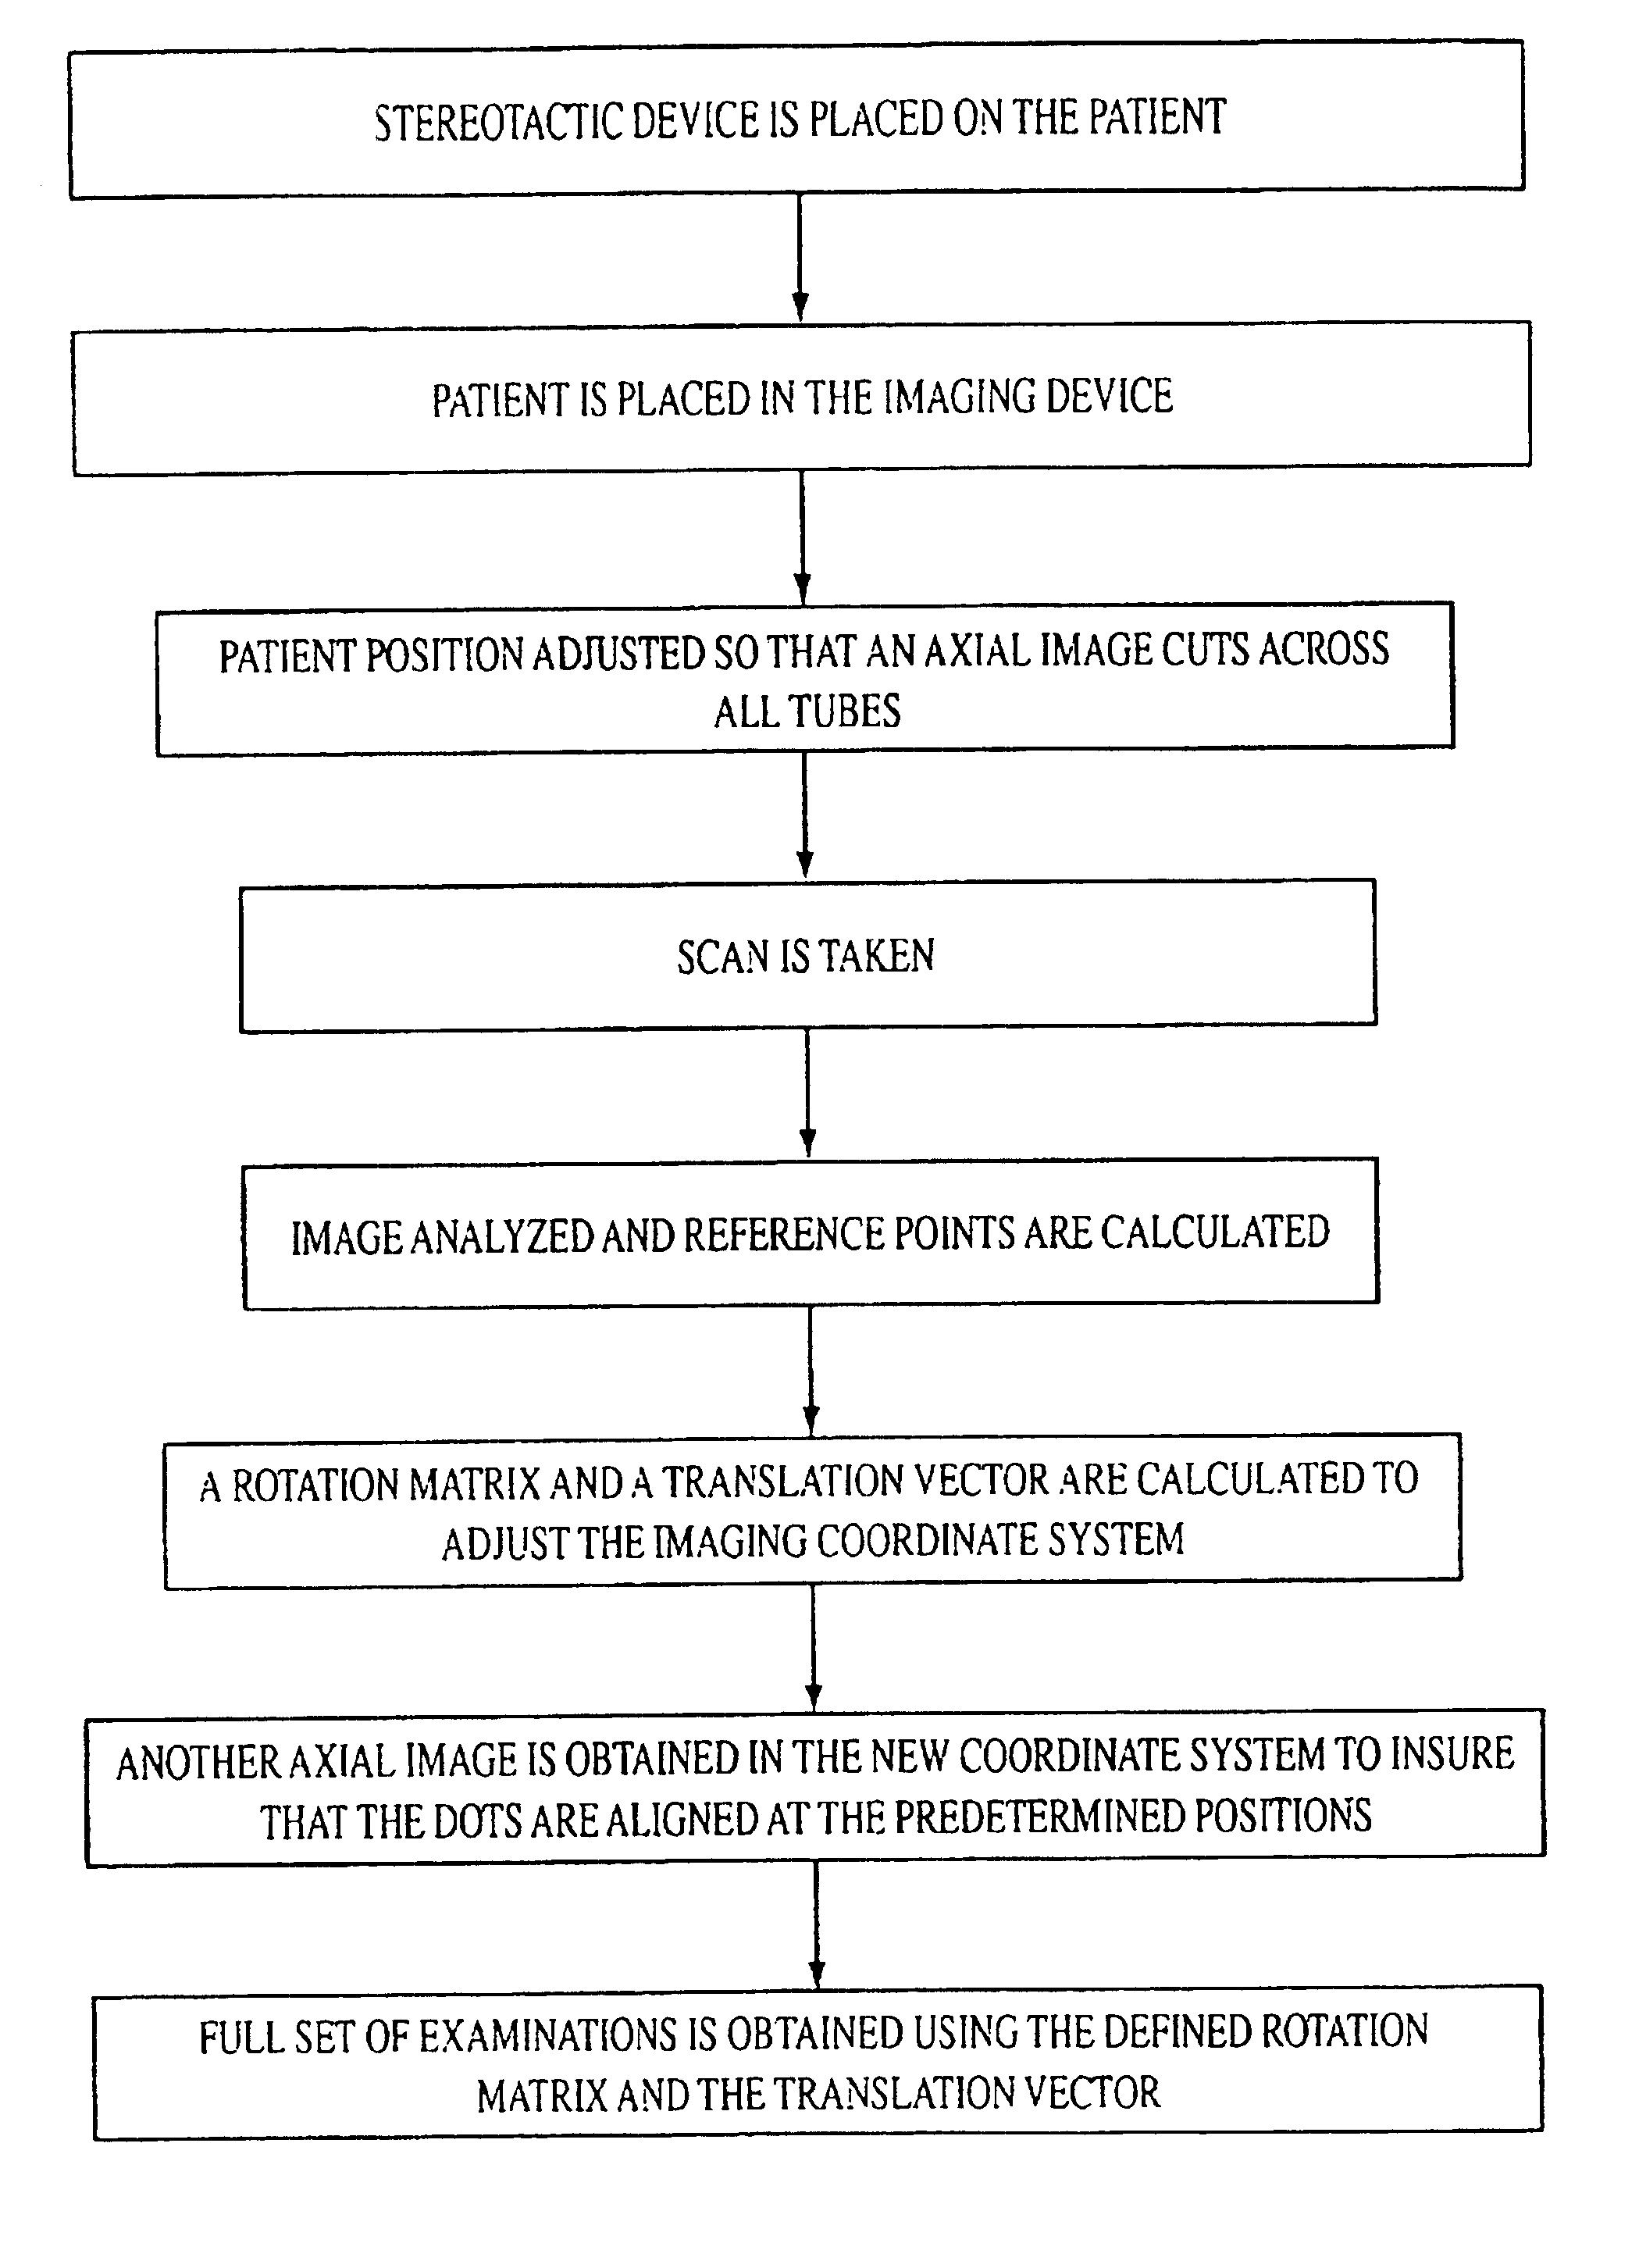 Versatile stereotactic device and methods of use